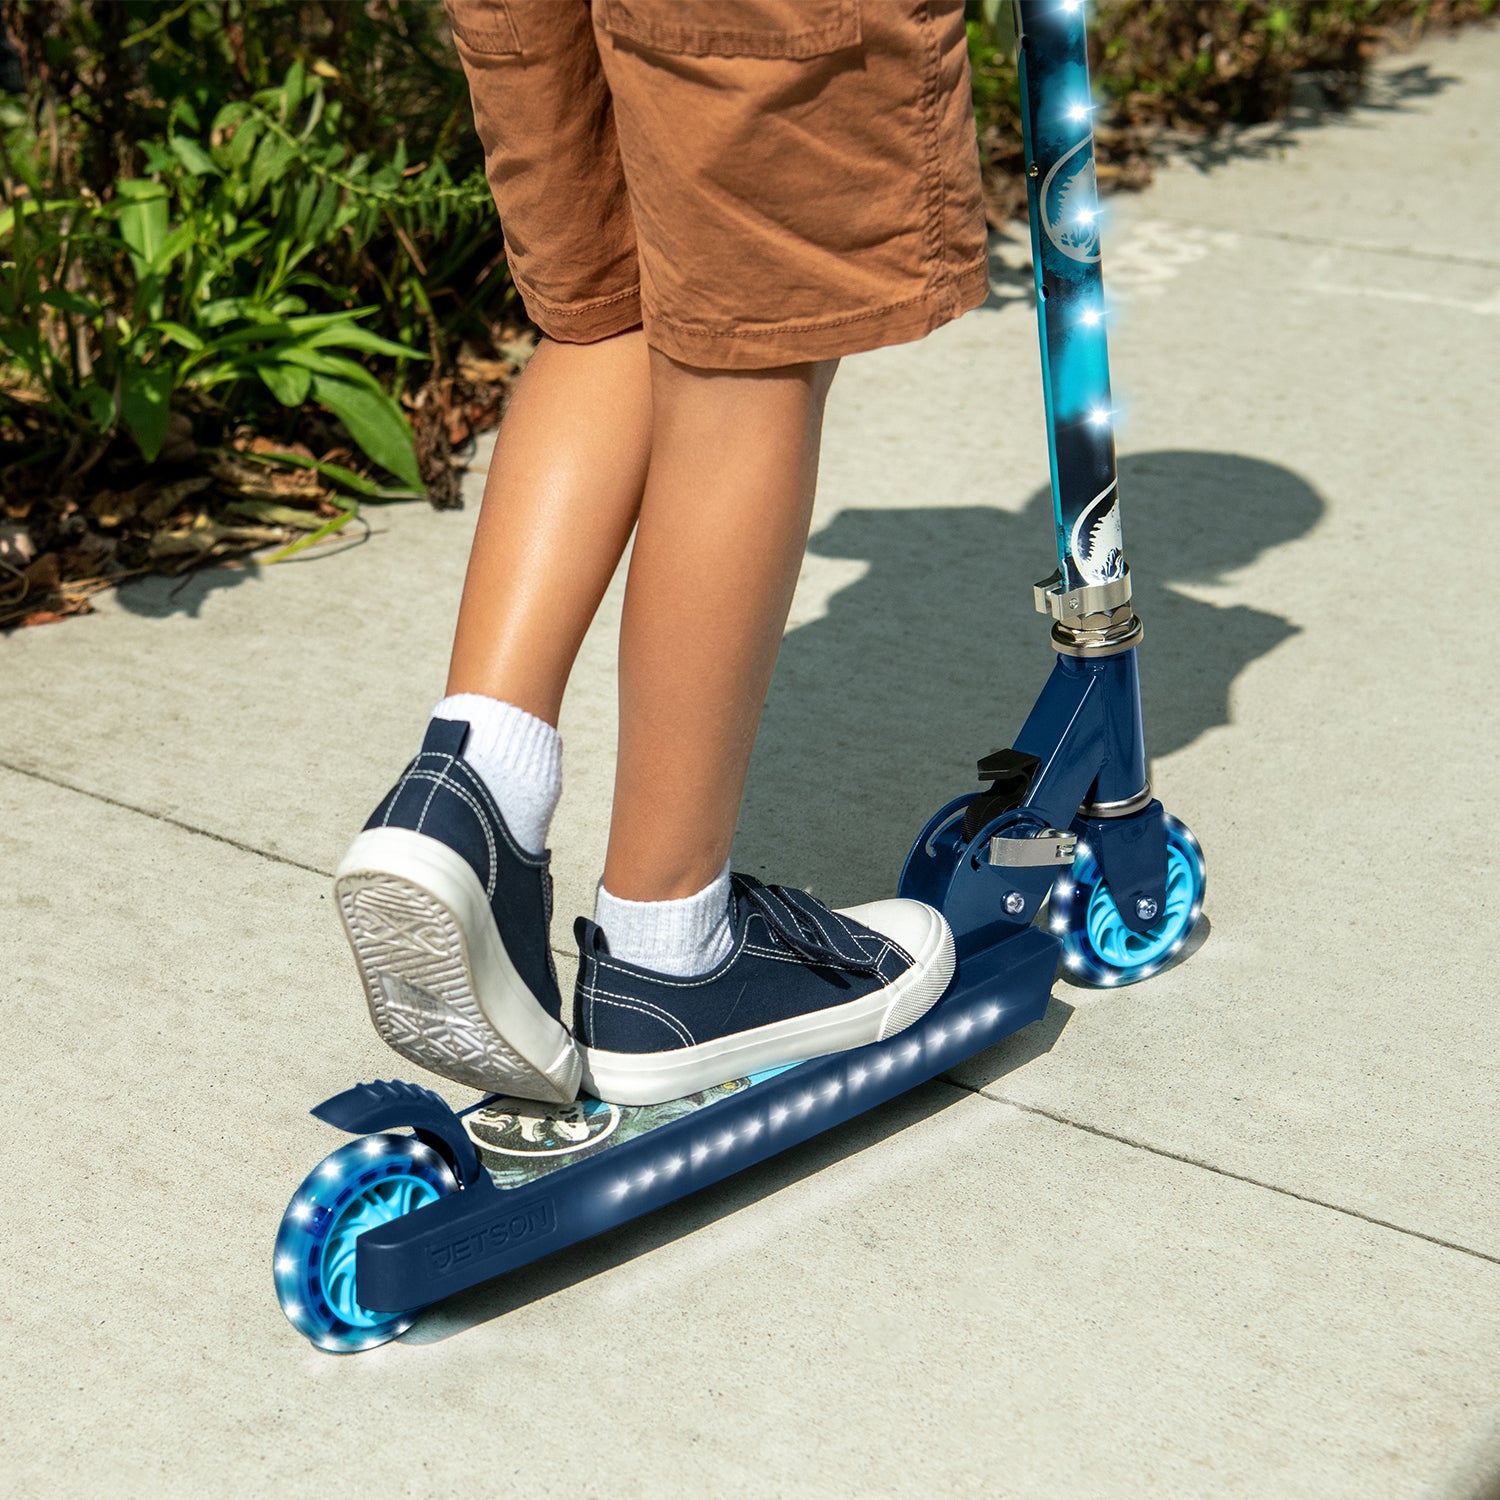 close up of a kid's feet on the jurassic park kick scooter